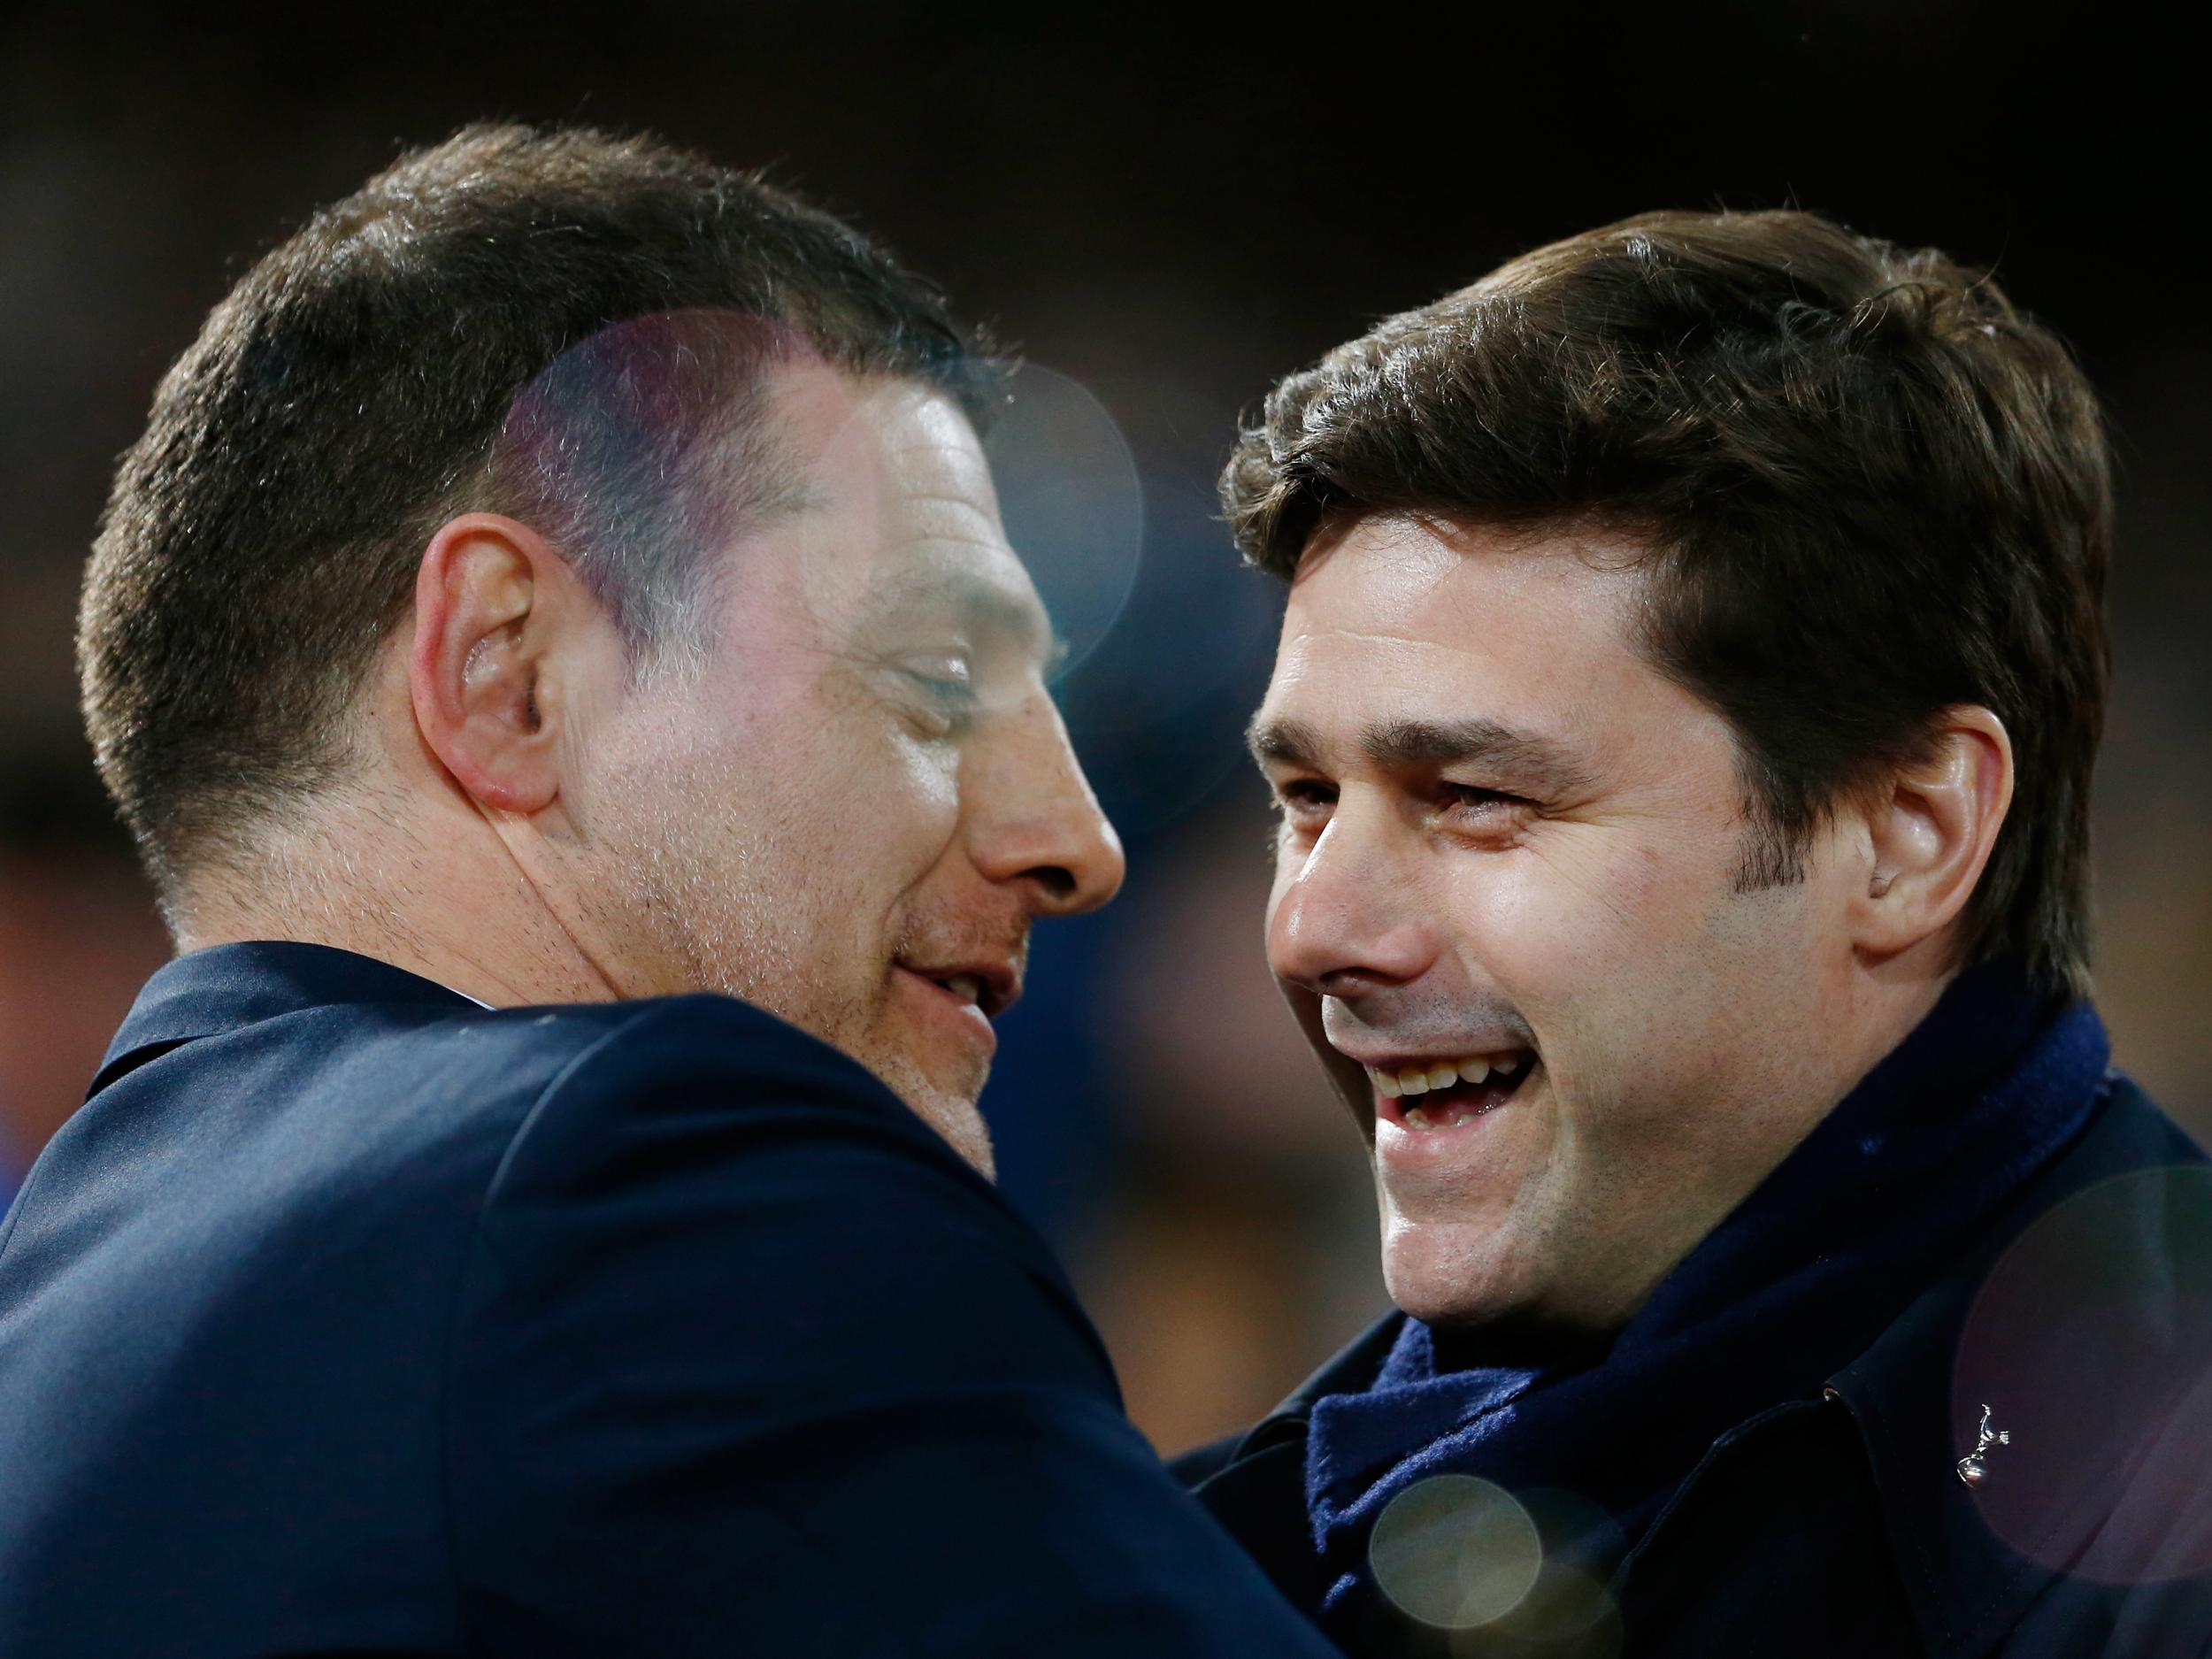 Pochettino is looking forward to chatting with Bilic on Friday night